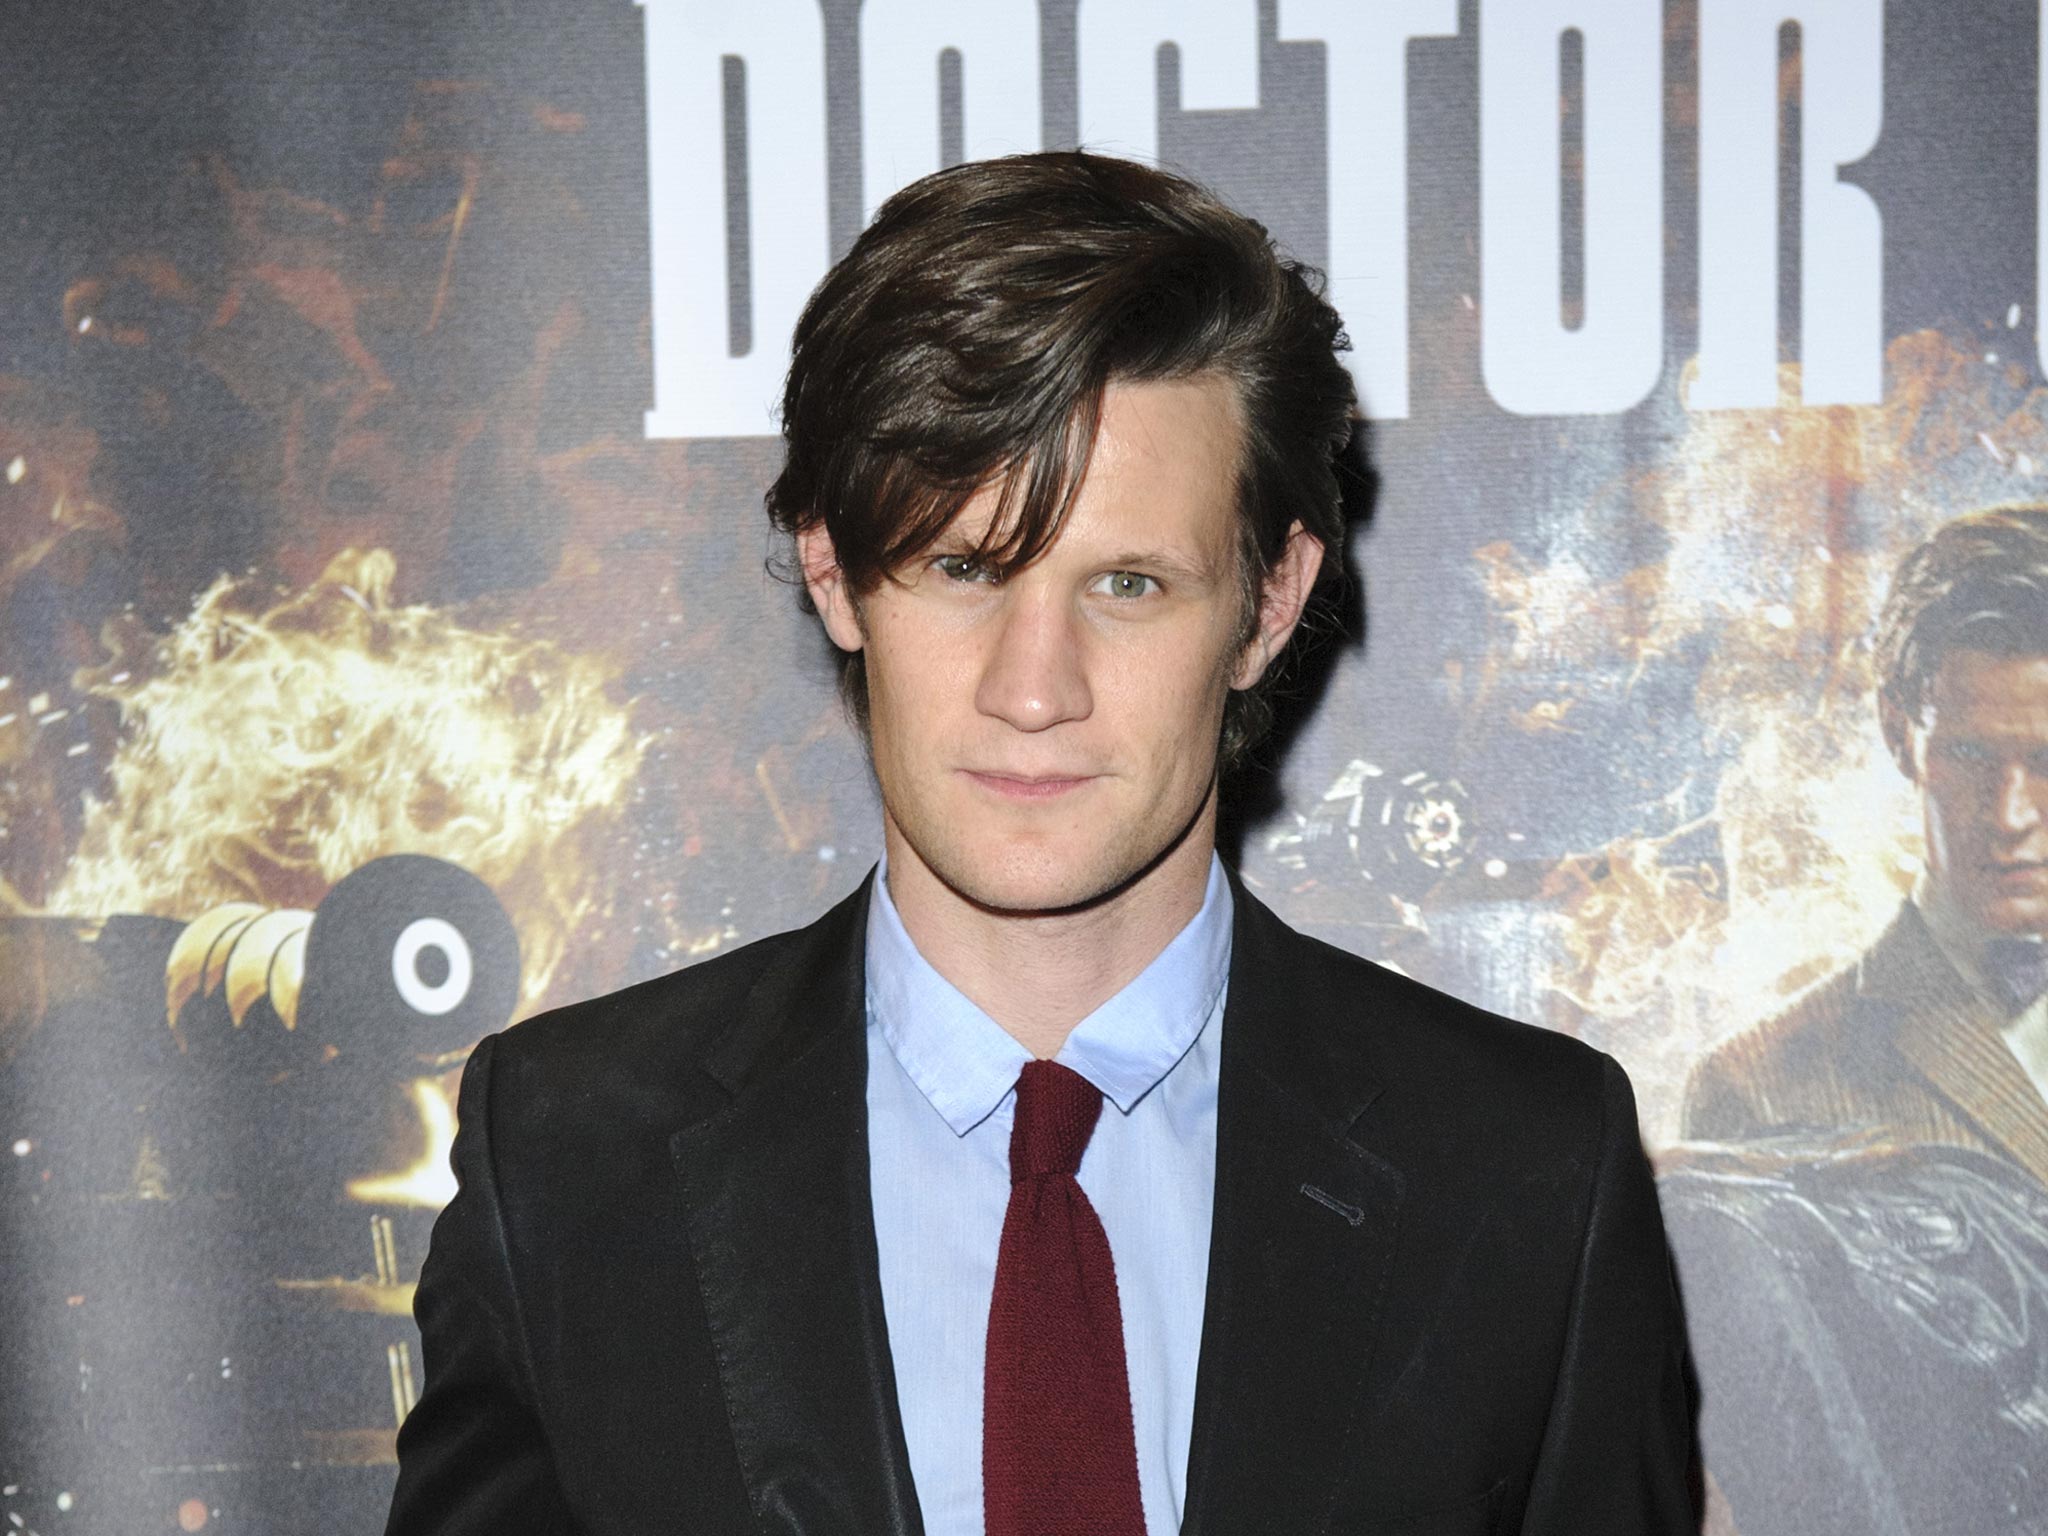 Matt Smith will be starring in the film of 'The Terminator' franchise